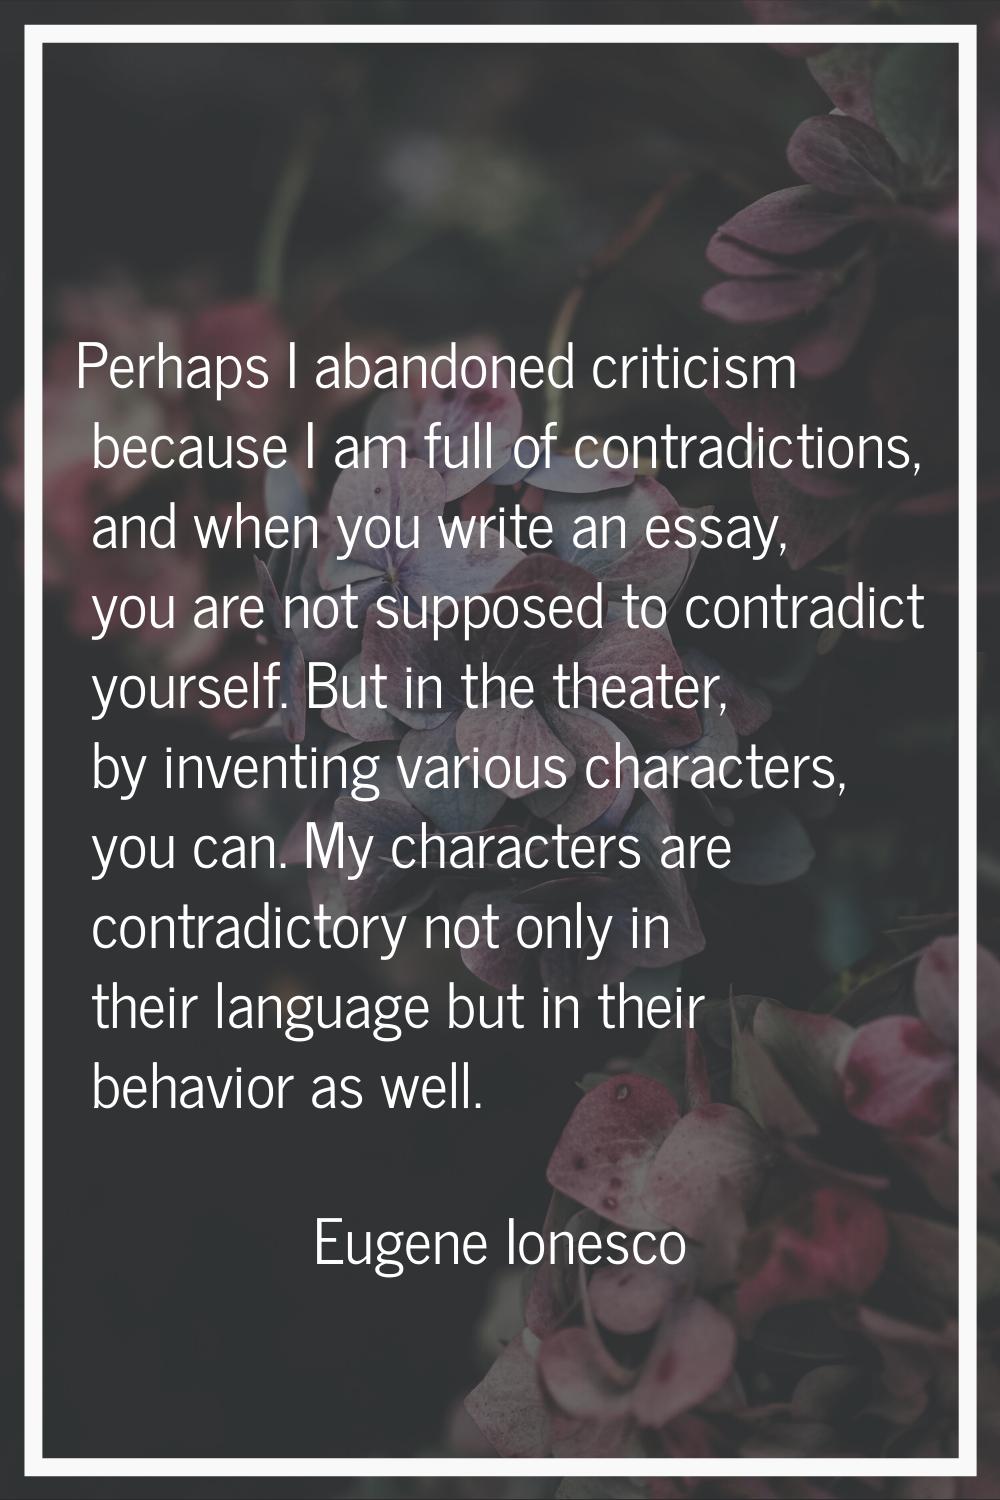 Perhaps I abandoned criticism because I am full of contradictions, and when you write an essay, you